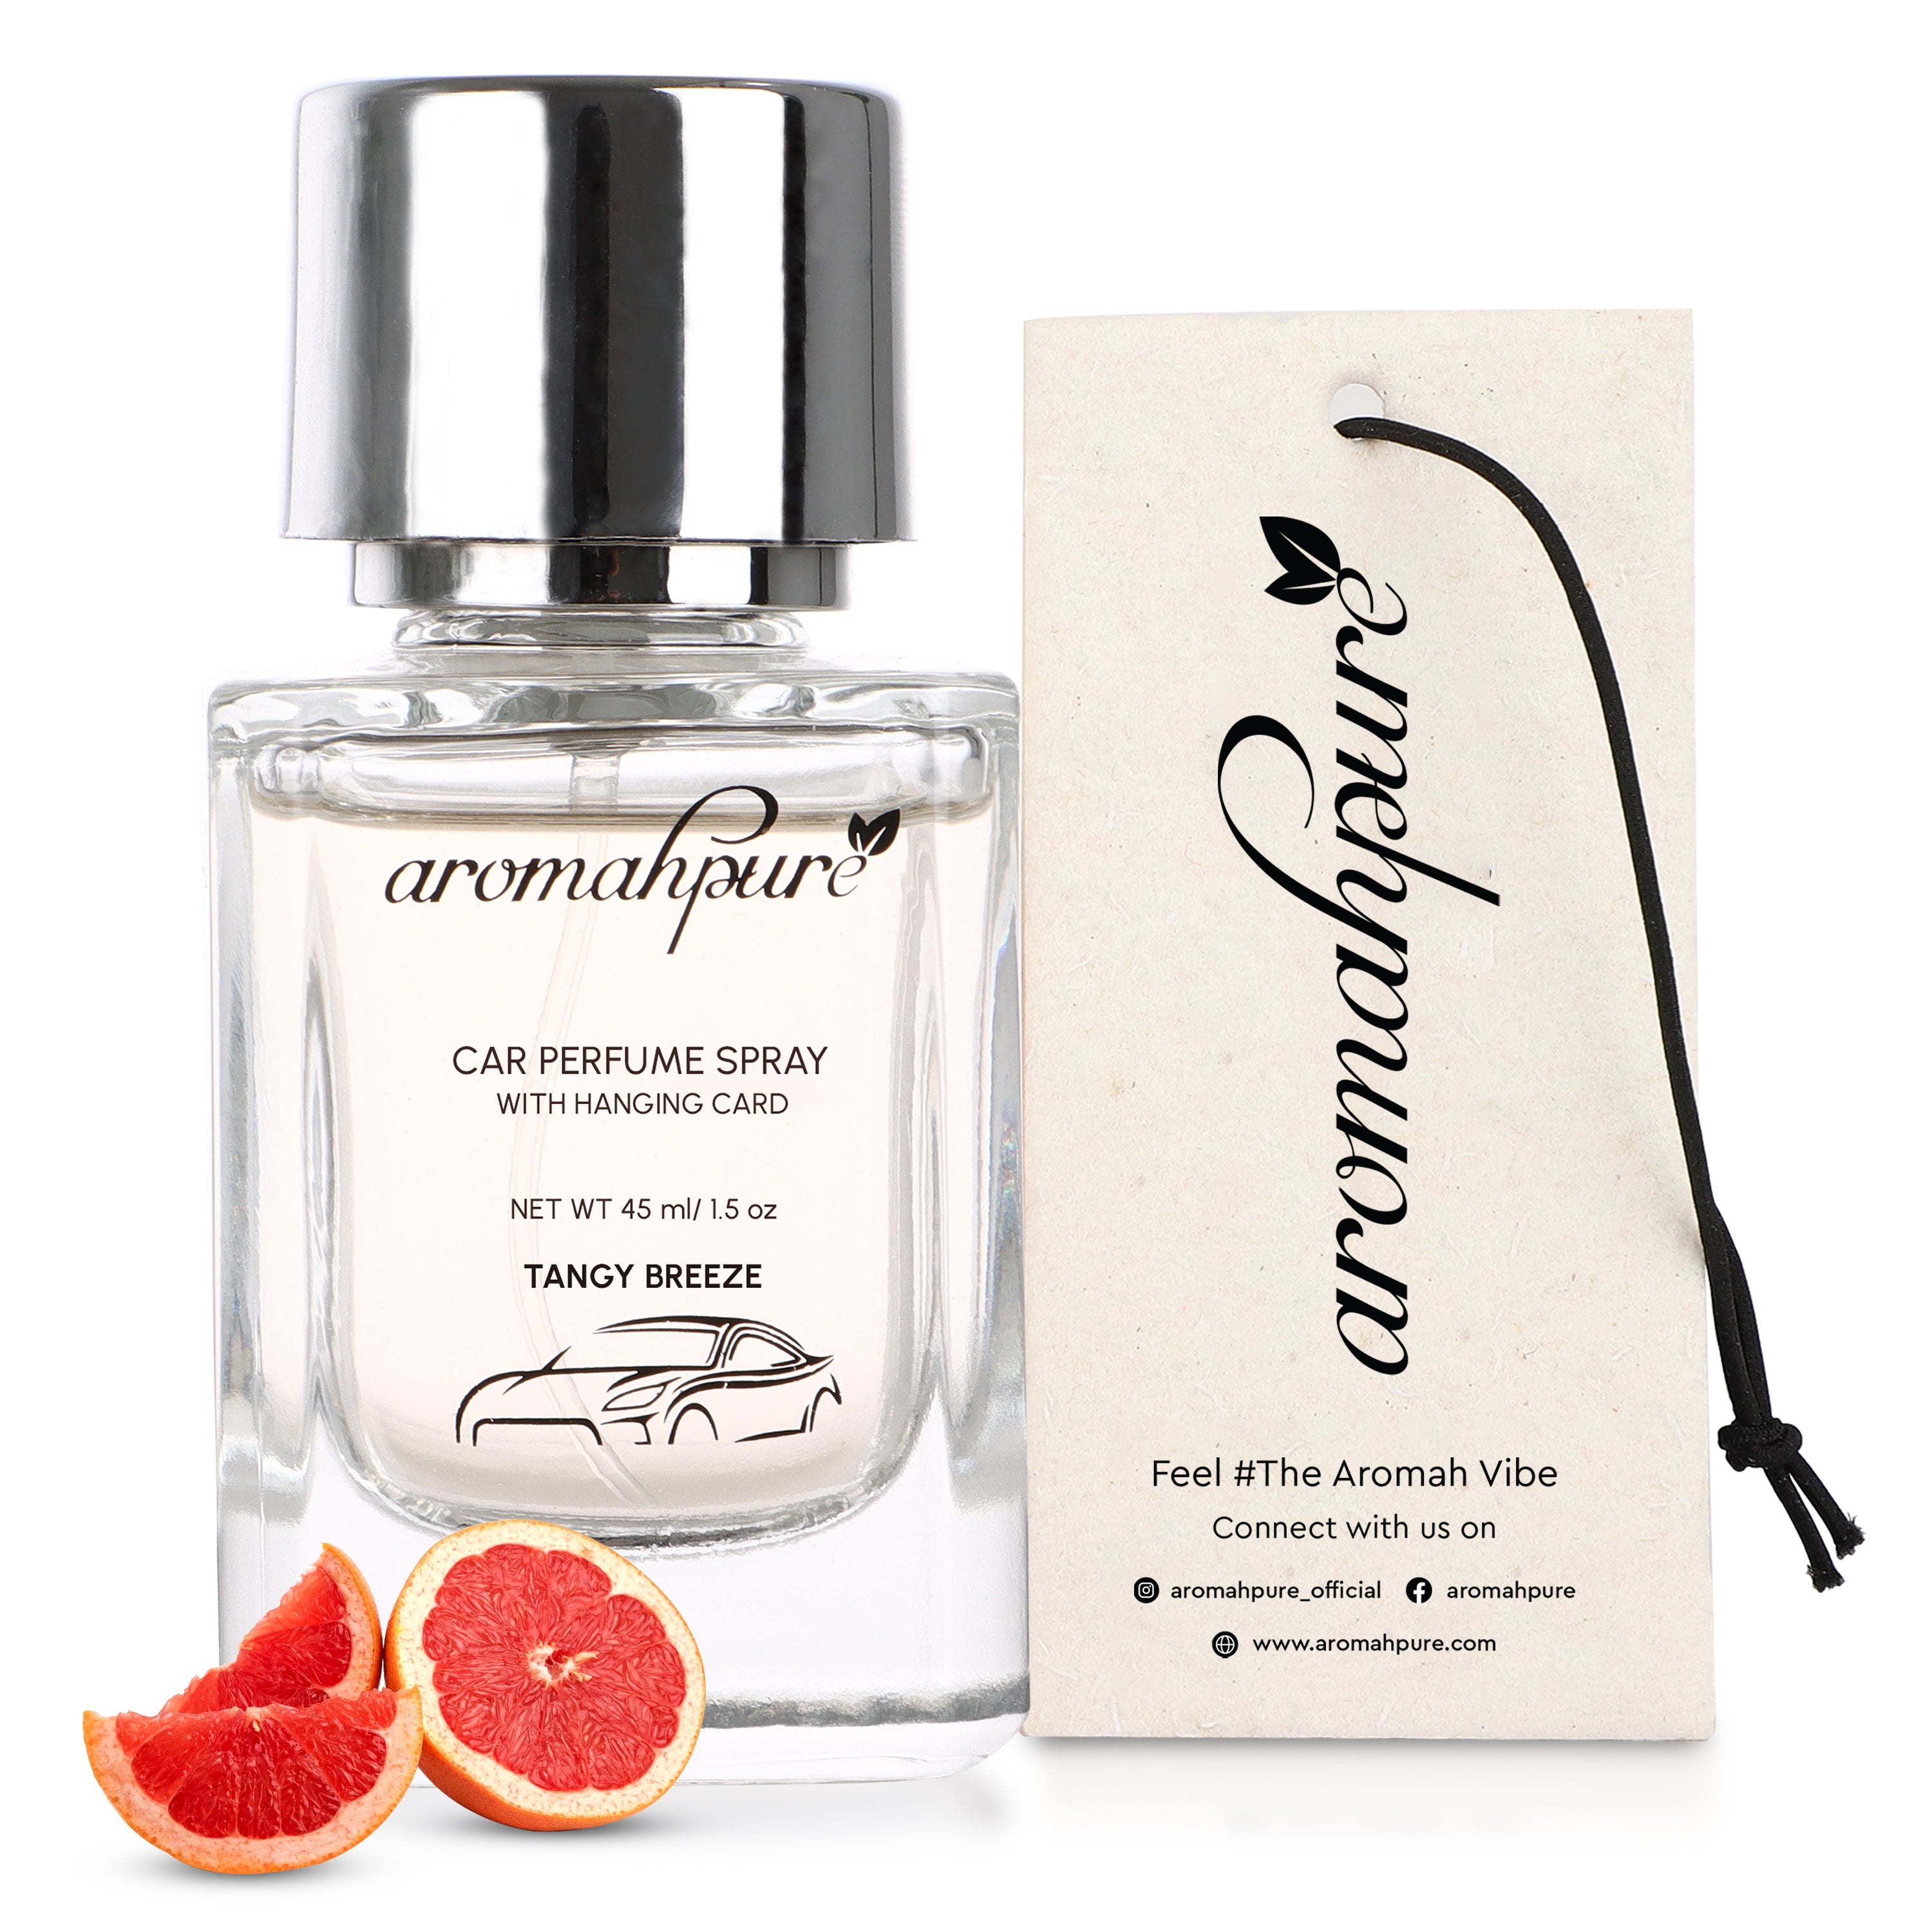 Buy Car Perfume Spray with Hanging Card (Tangy Breeze) Online - Aromahpure